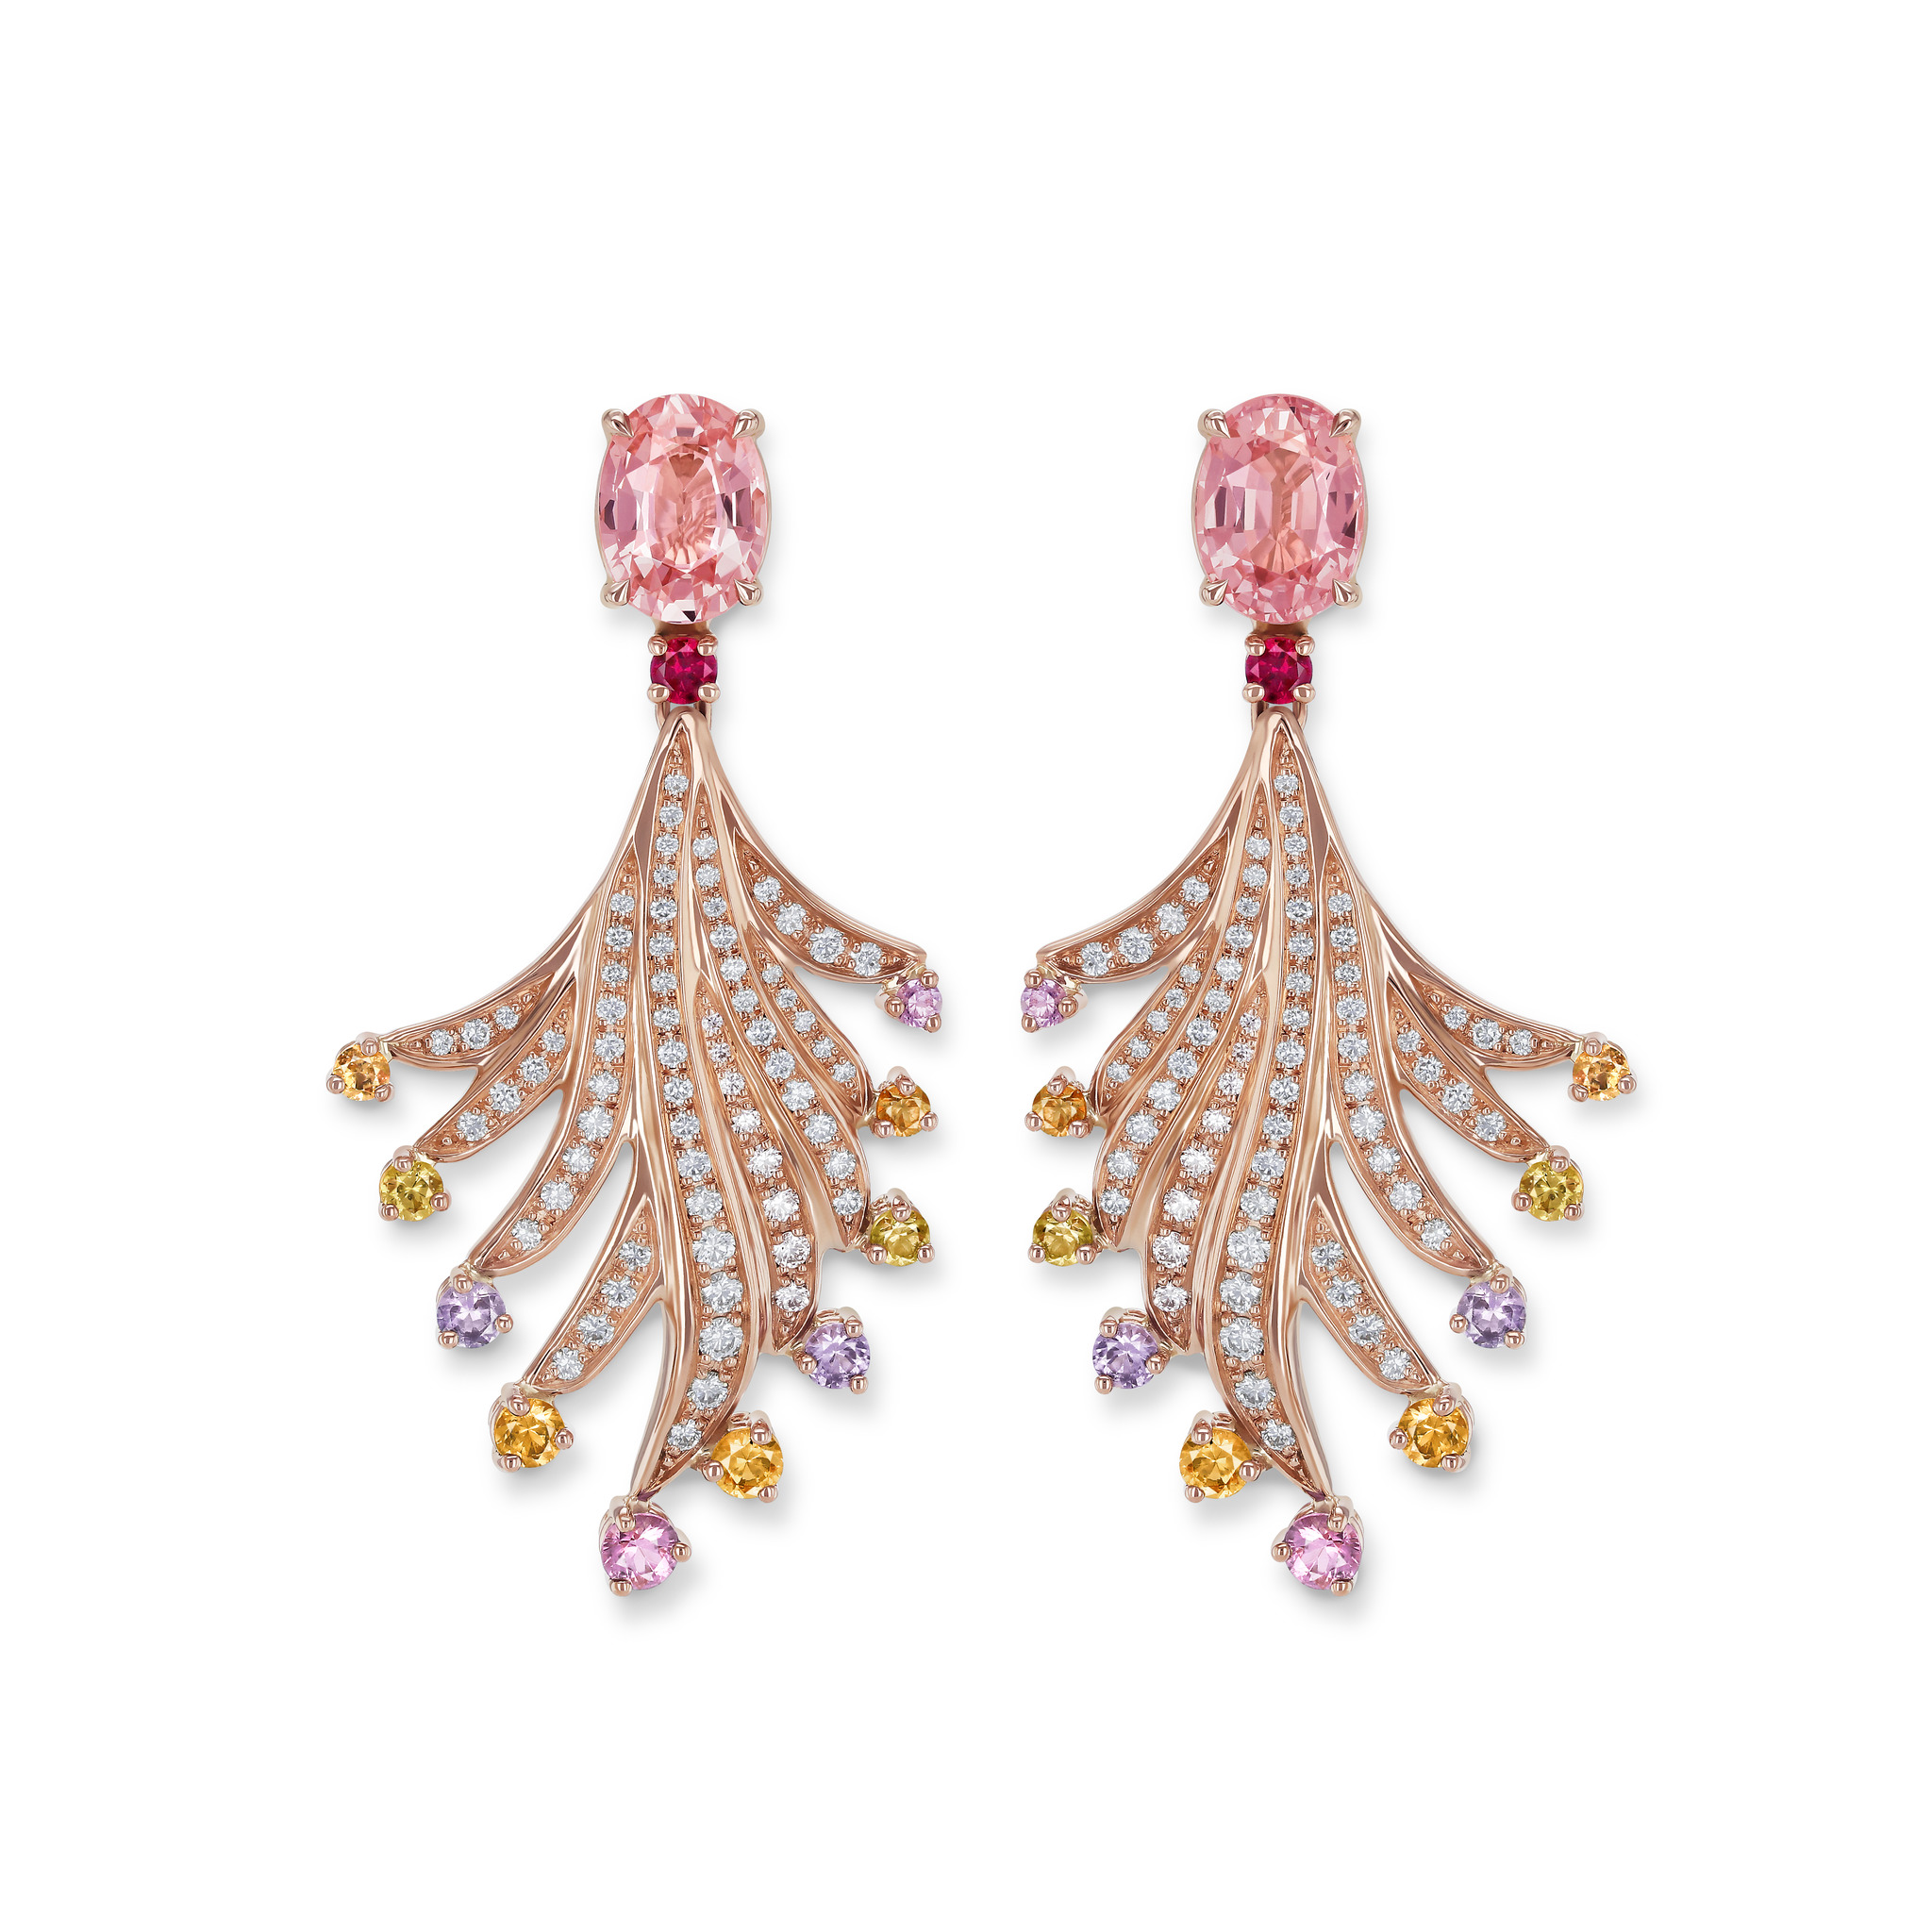 Earrings with padparadscha sapphires